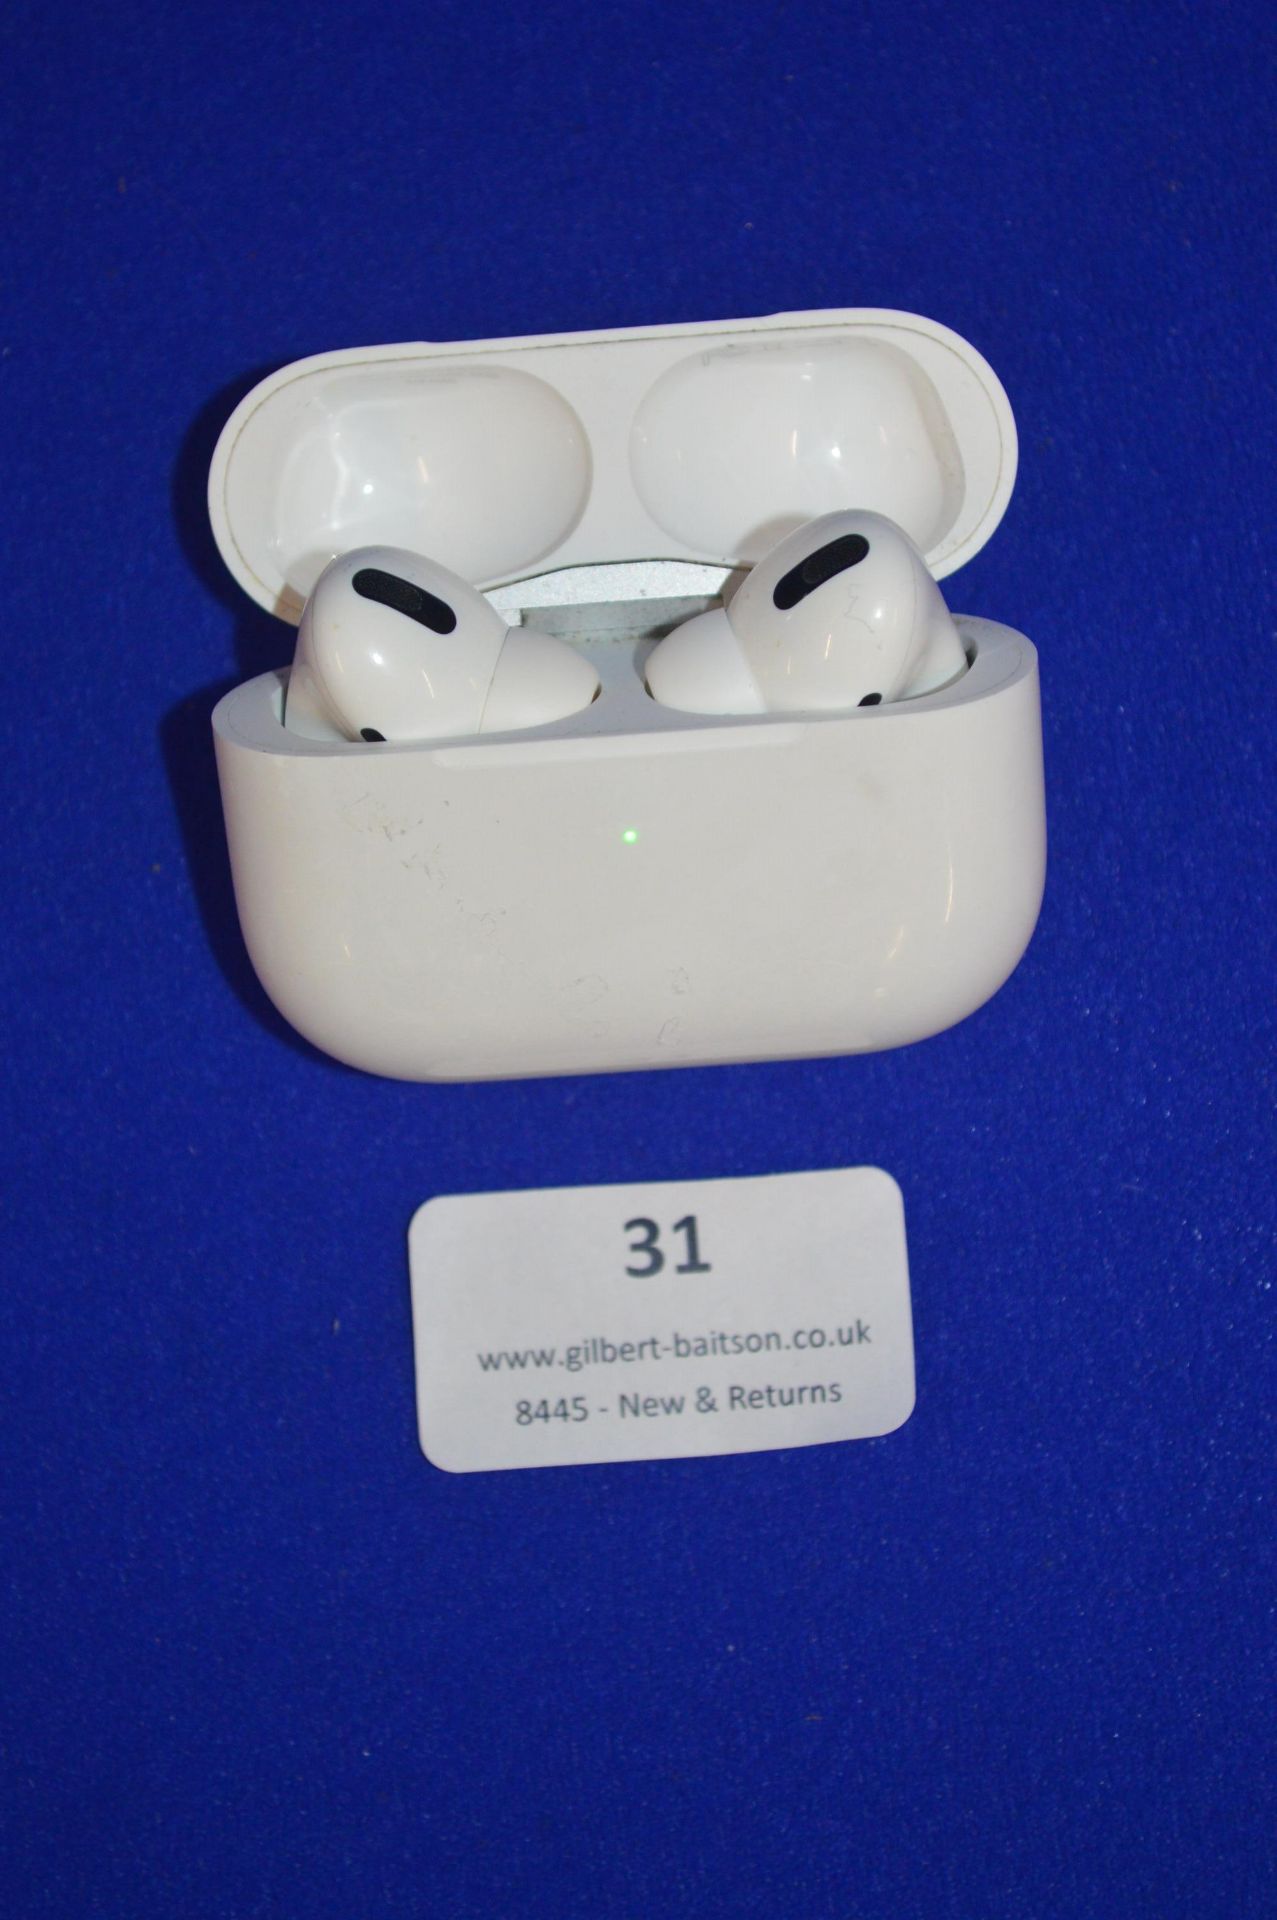 *Apple AirPods Pro with MagSafe Charging Case - Image 2 of 2